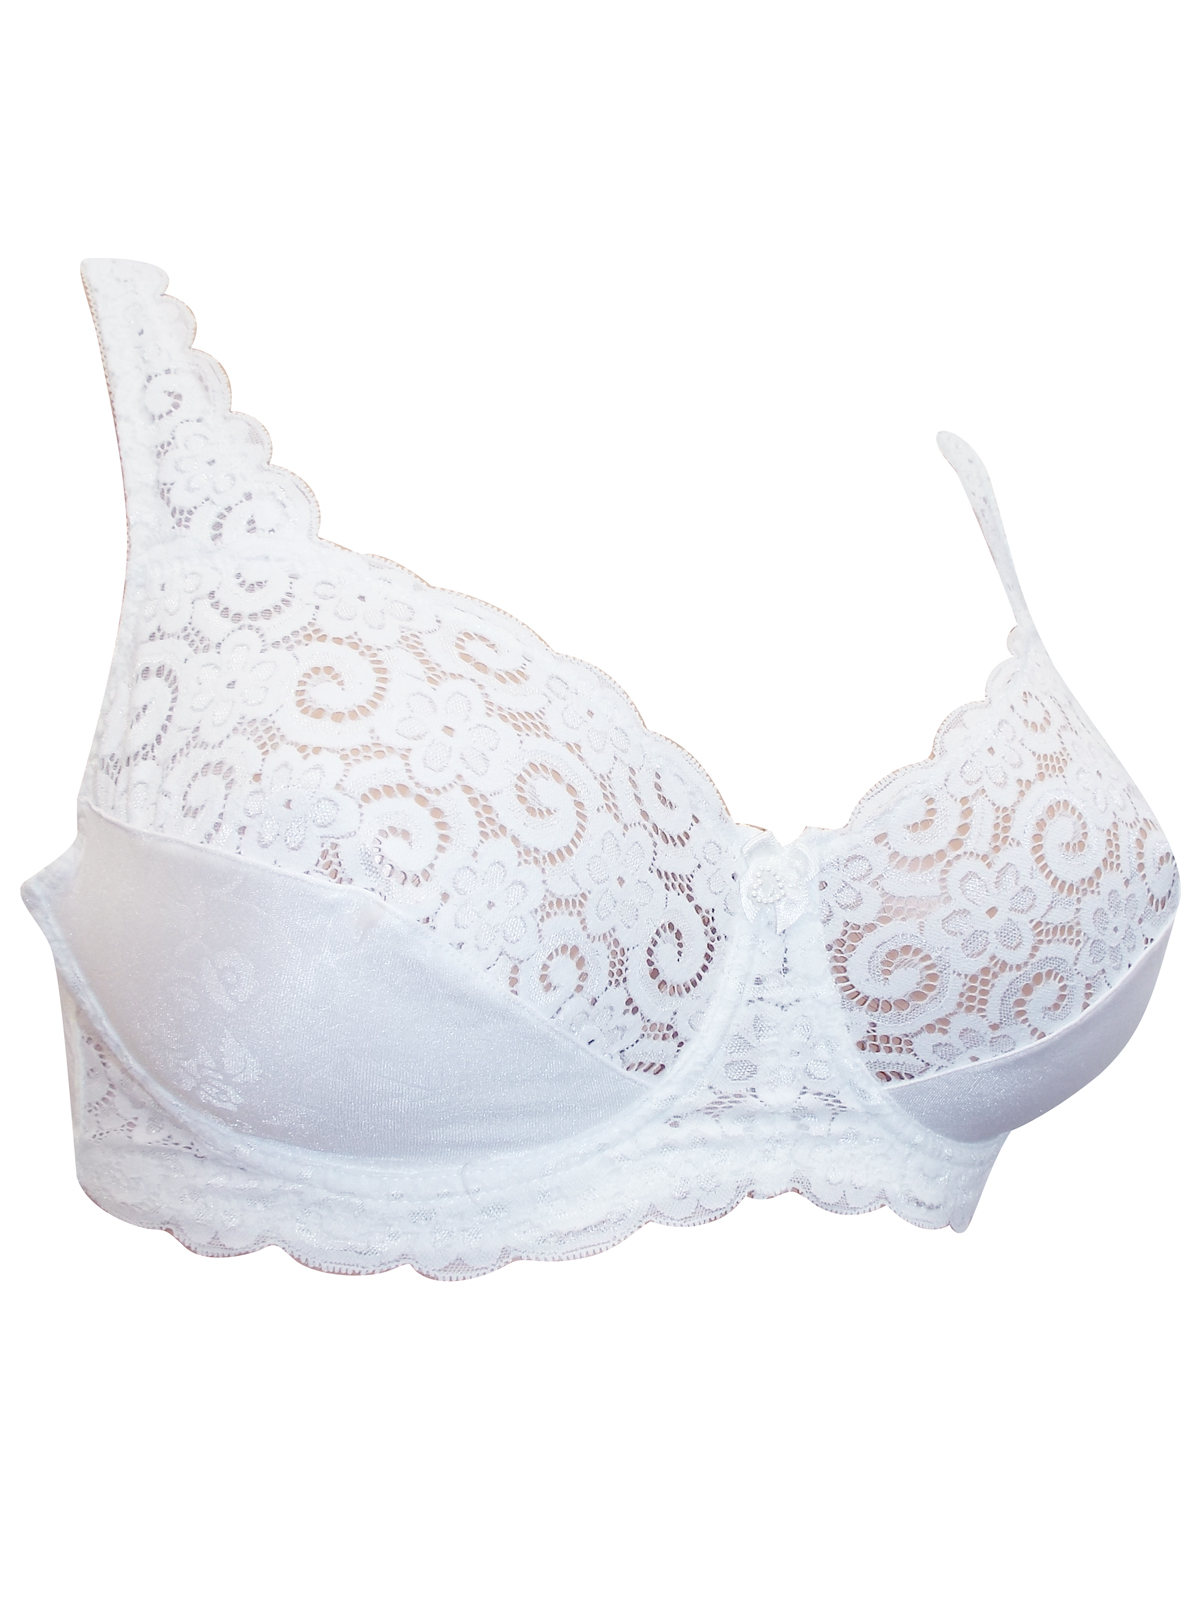 Naturana Naturana White Floral Lace Soft Cup Underwired Full Cup Bra Size 34 To 40 B C